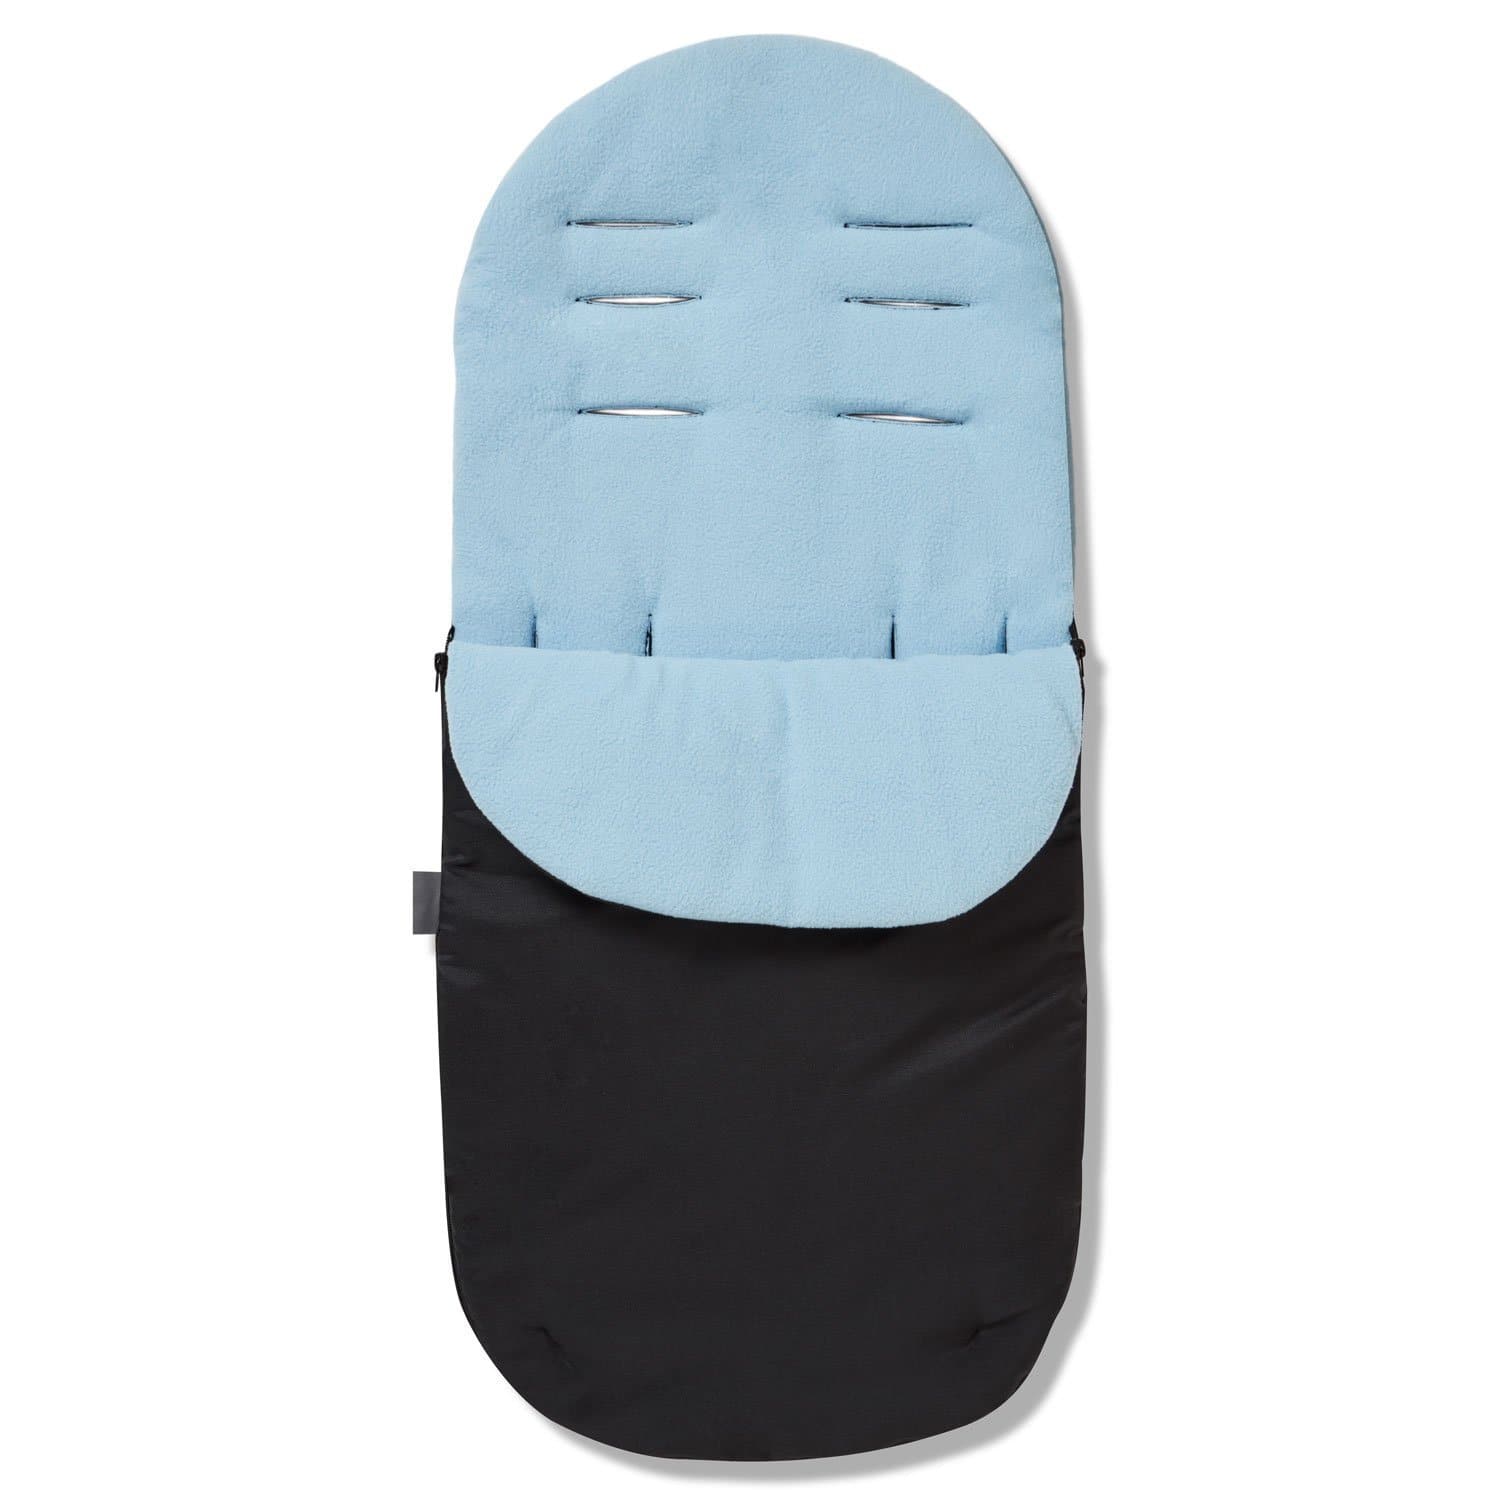 Footmuff / Cosy Toes Compatible with Bebe Confort - Light Blue / Fits All Models | For Your Little One